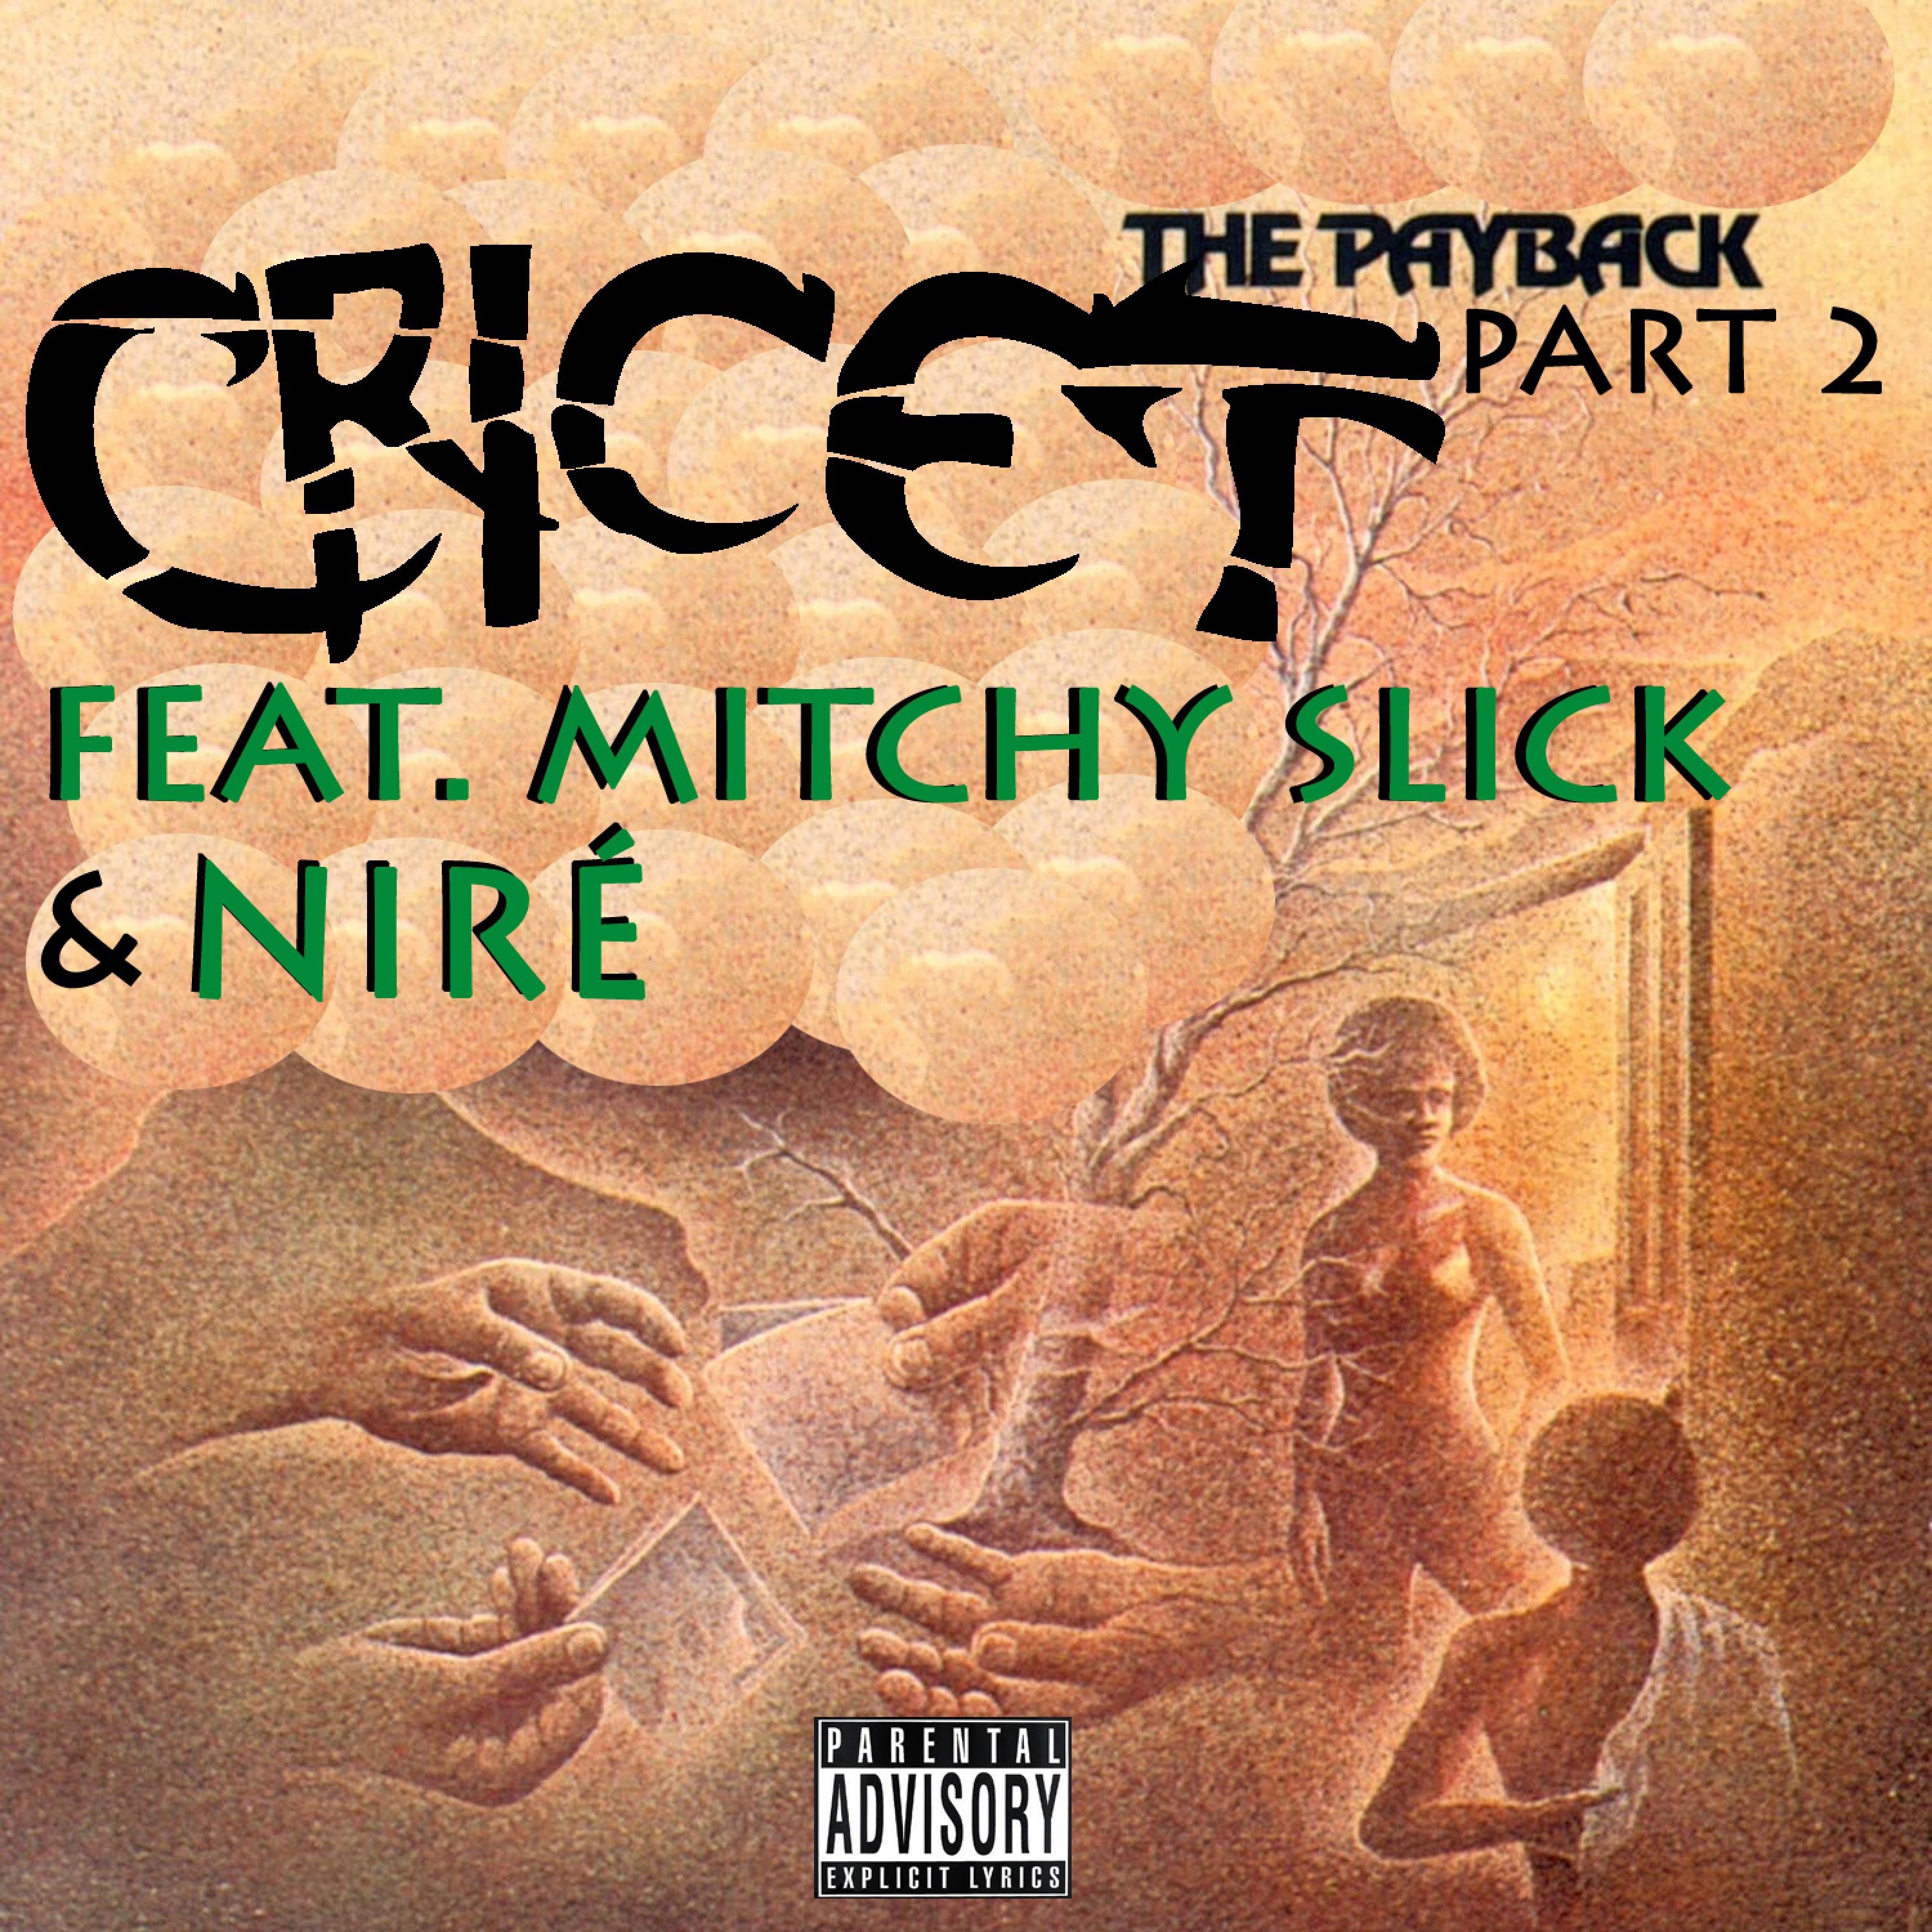 The Payback, Pt. 2 feat. Mitchy Slick  Nire